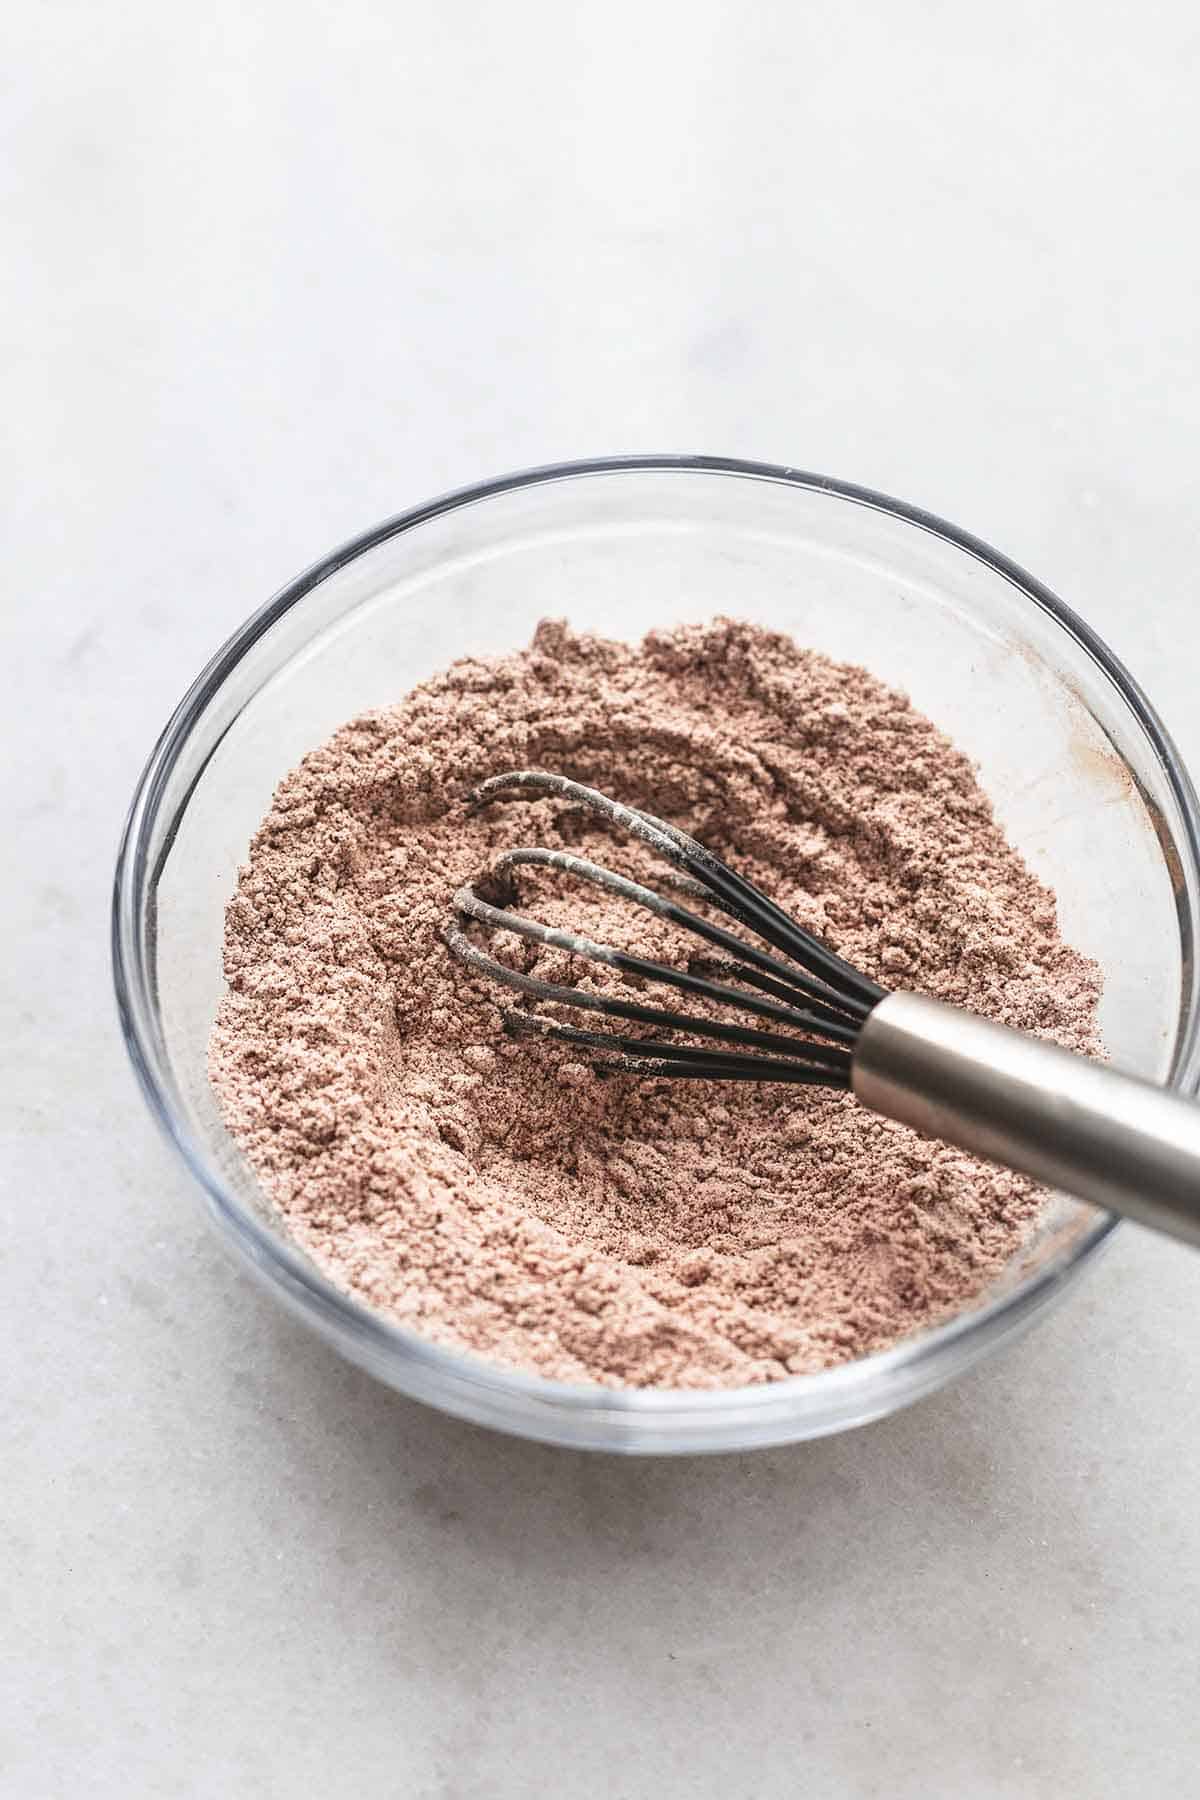 brown colored sugar and flour mixture in a glass bowl with a silver and black rubber whisk.